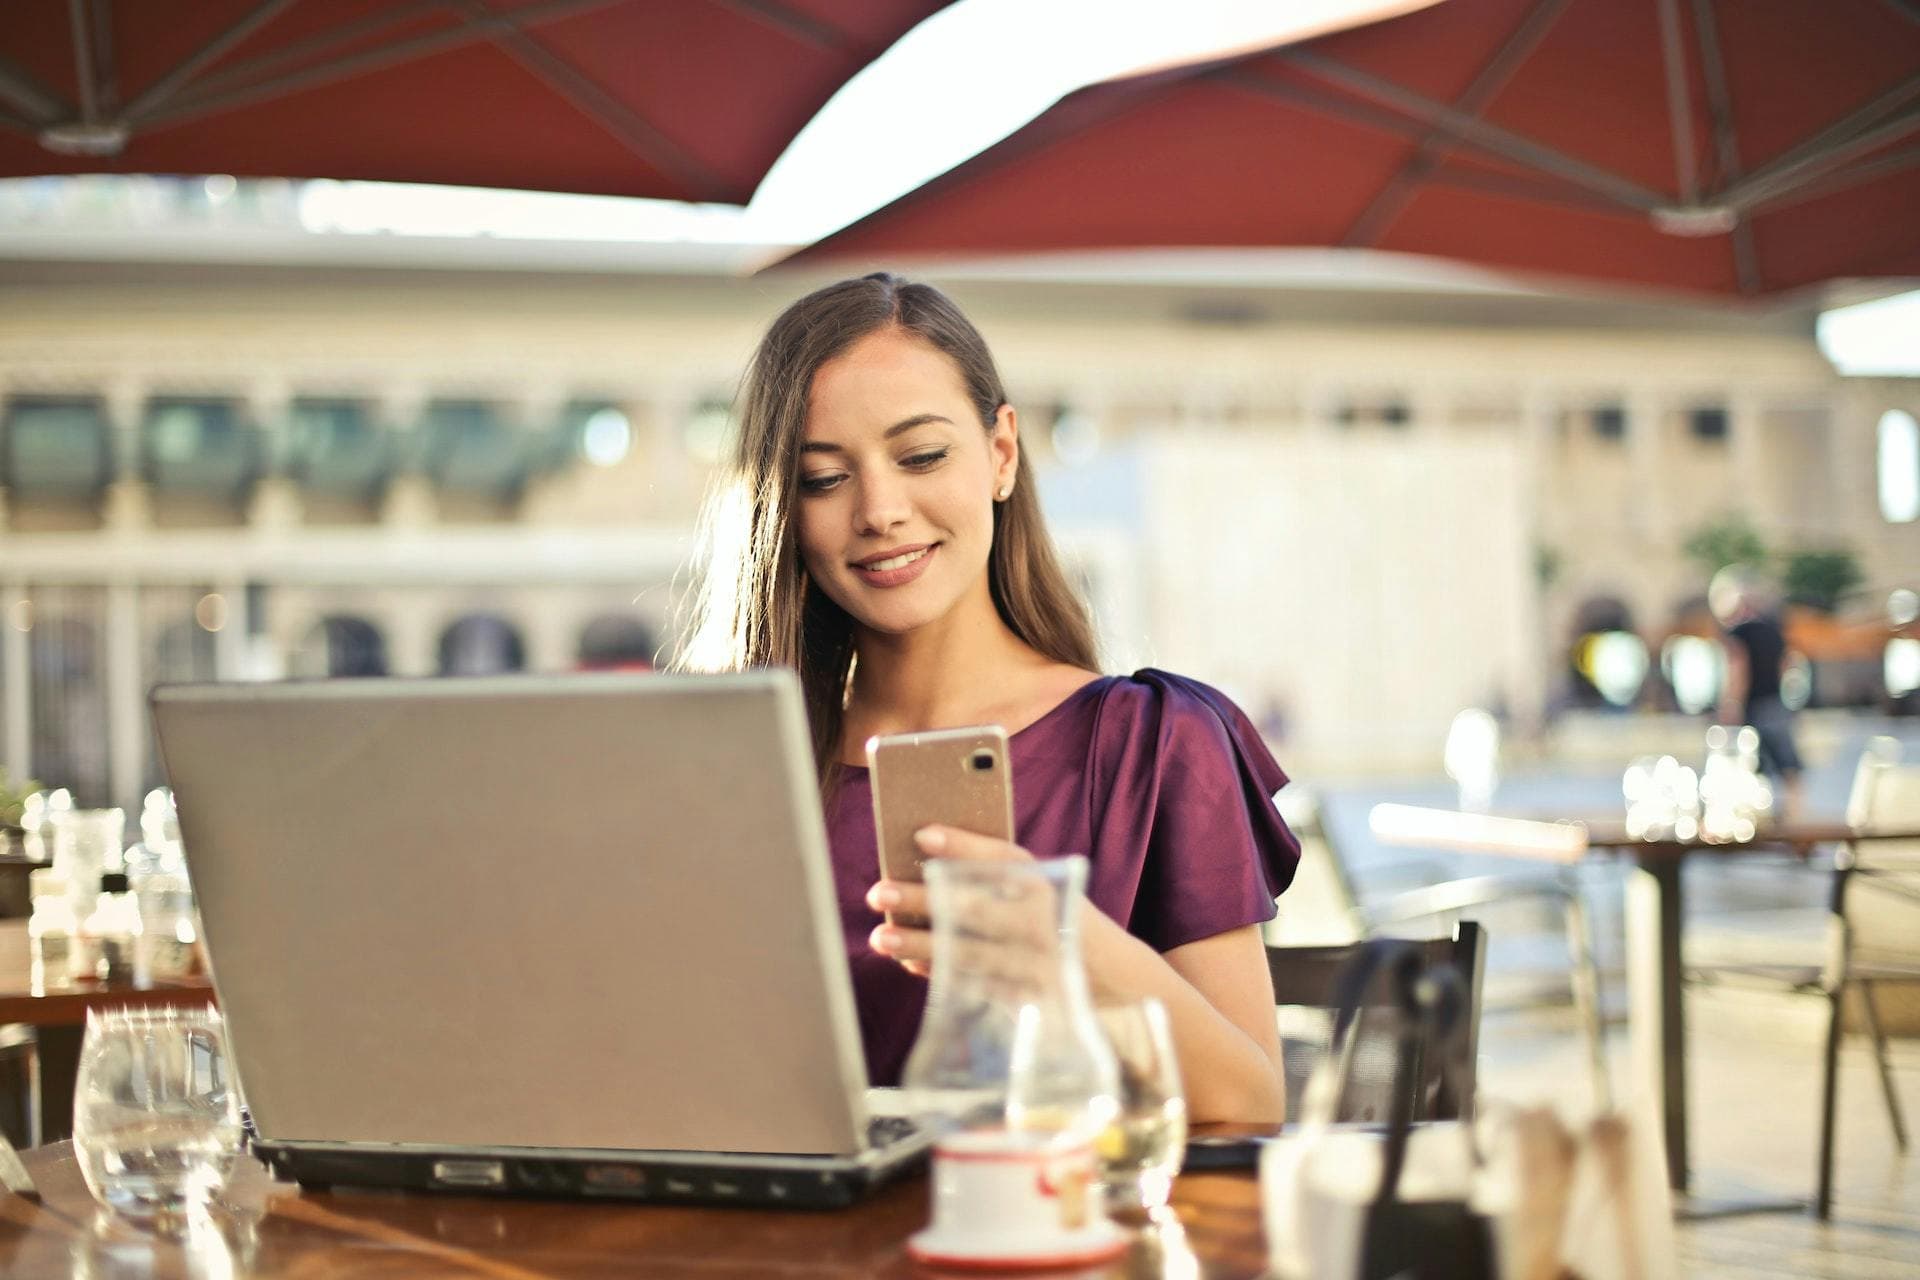 Female business owner on a laptop in a restaurant looking at her phone